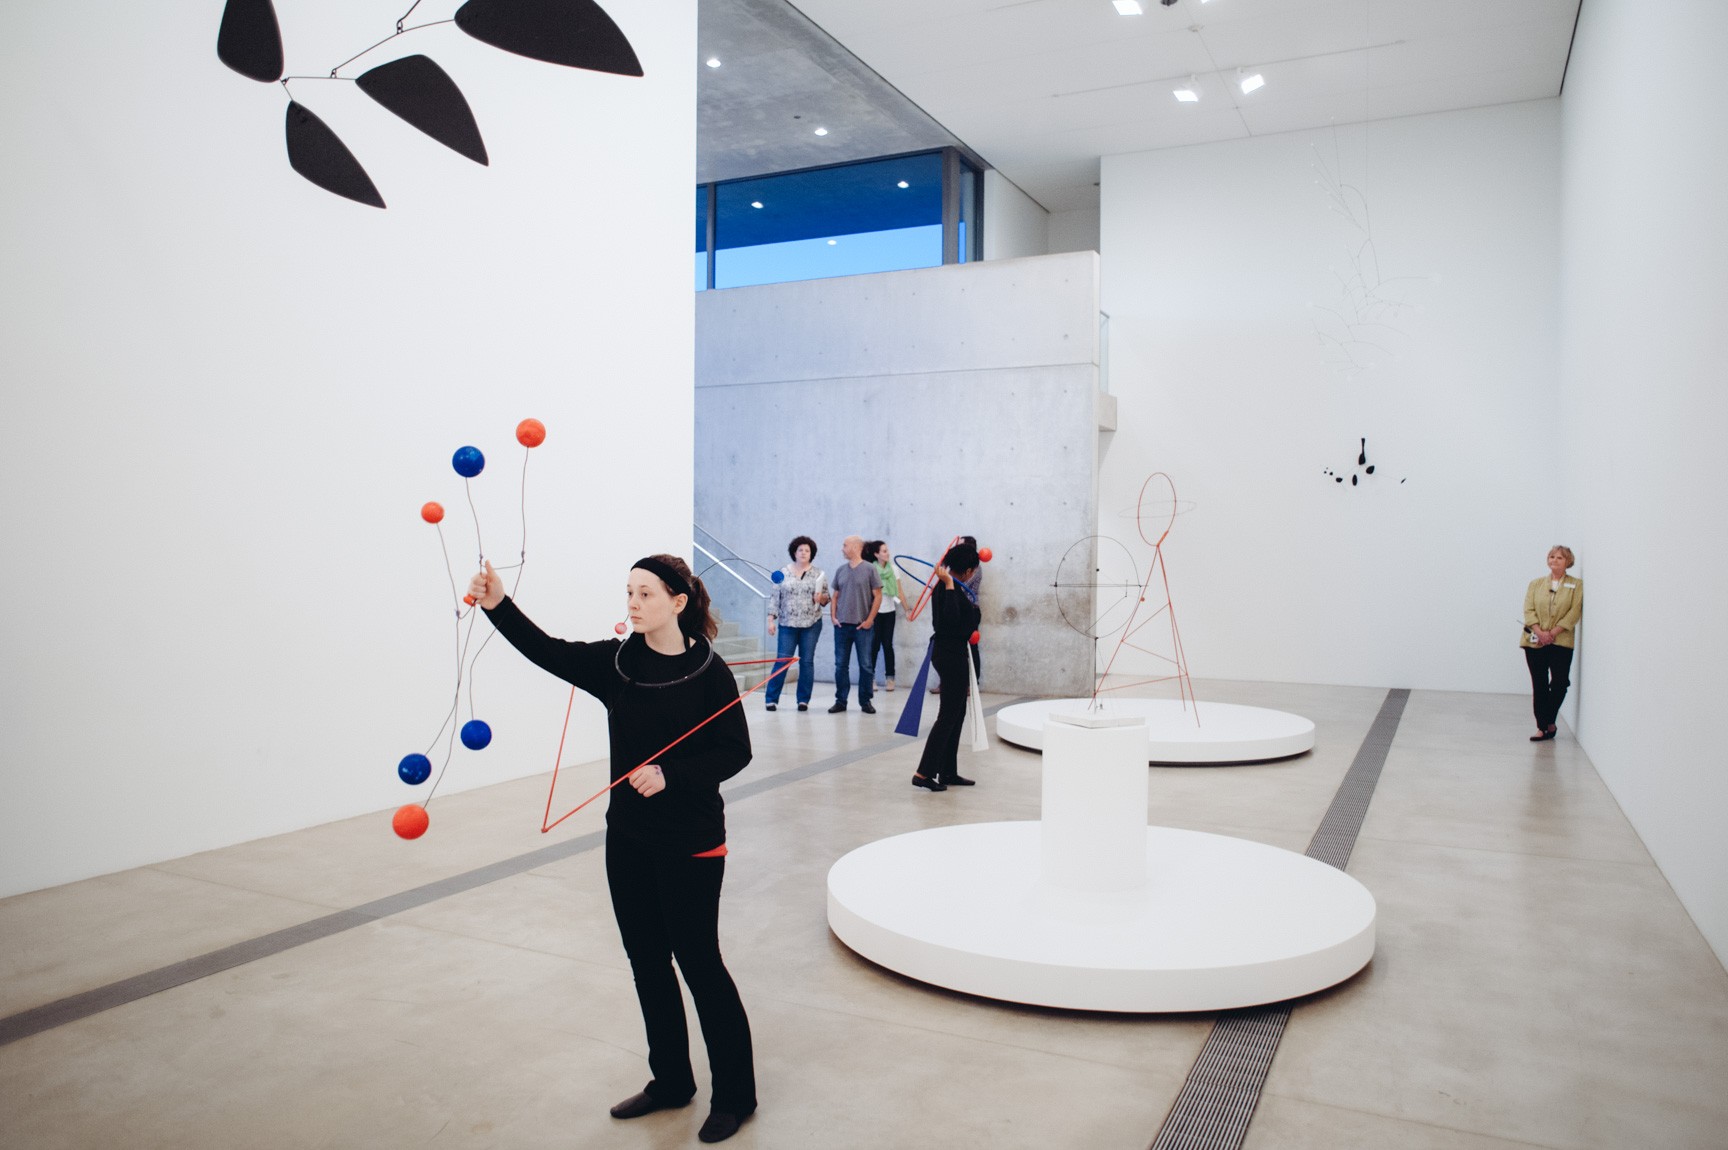 Students perform for a small audience in the Main Gallery, holding and wearing geometric shapes inspired by Calder's sculptures.